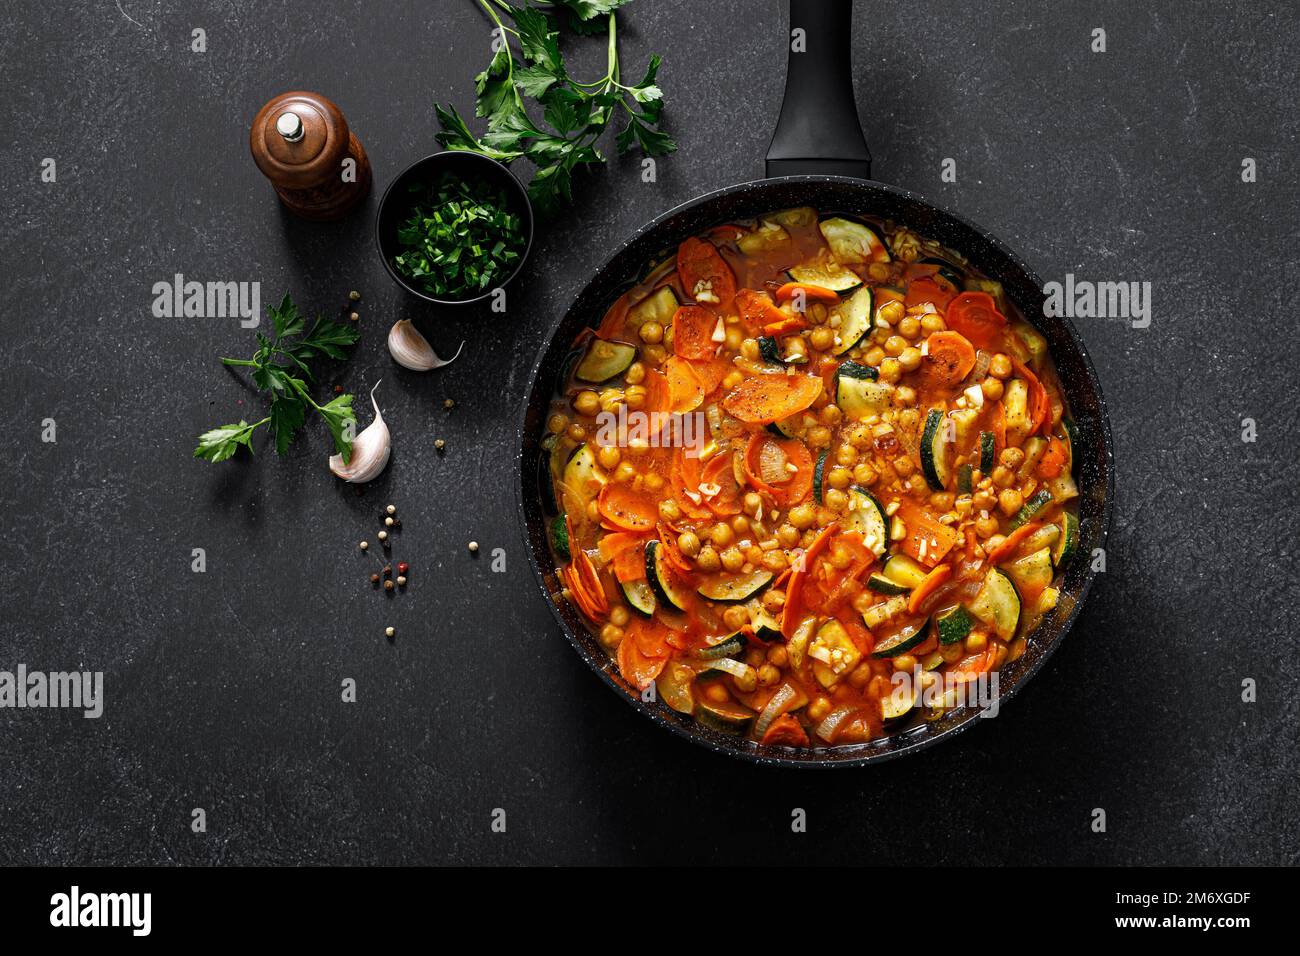 Chickpea and zucchini saute with carrot and garlic. Classic italian side dish. Top view Stock Photo